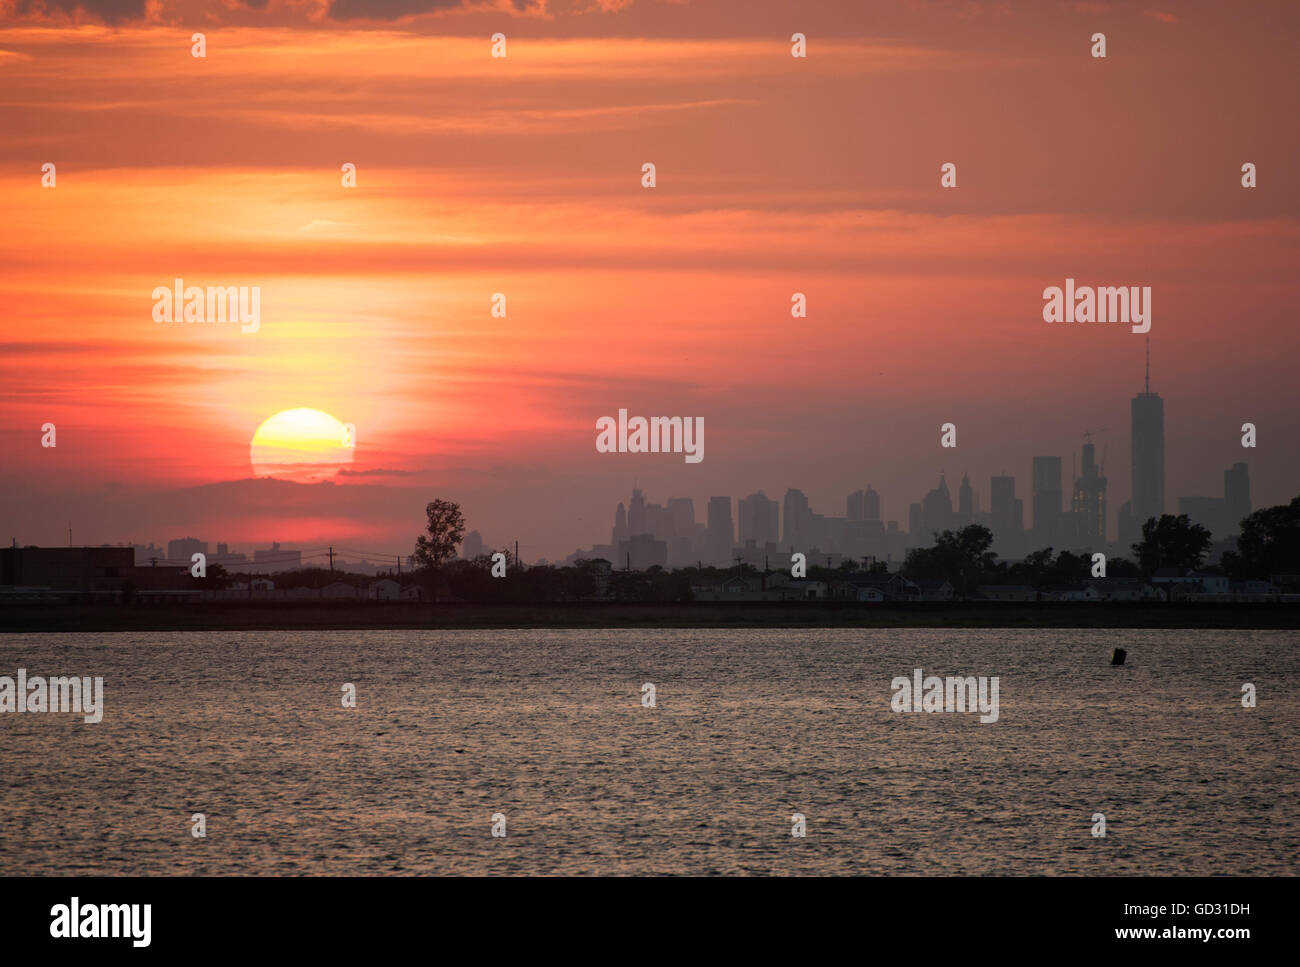 Manhattan as seen from Jamaica Bay, a wildlife refuge that lies between Brooklyn and Queens, at sunset in early July. Stock Photo